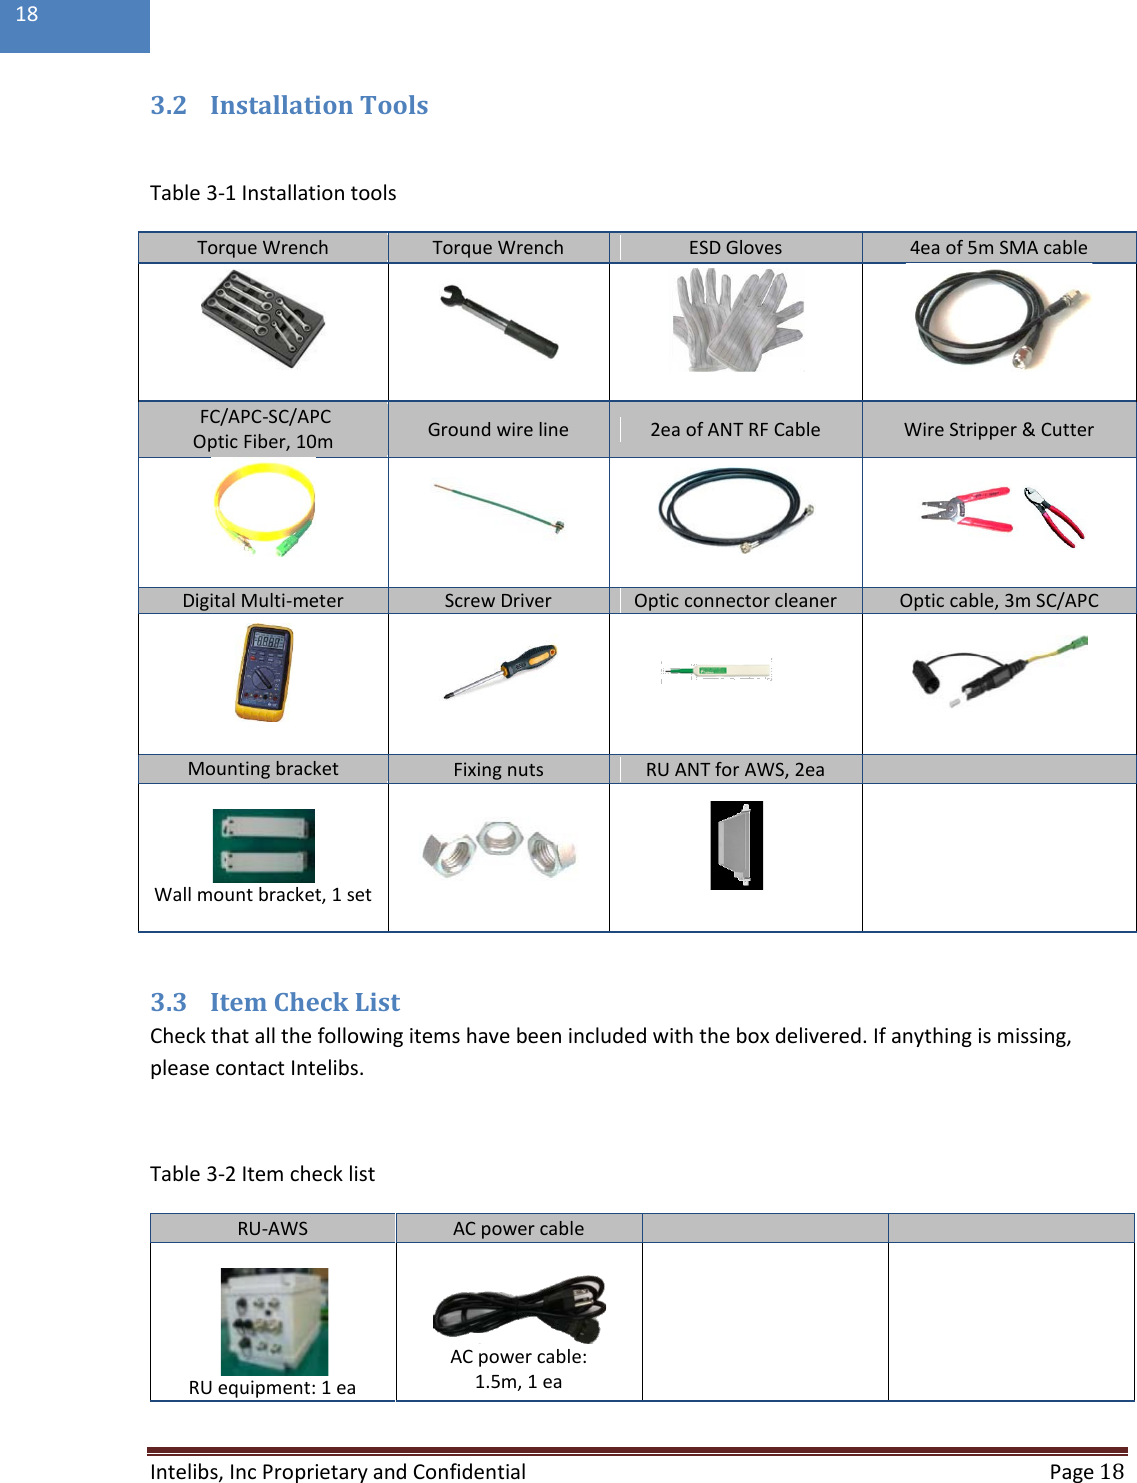  Intelibs, Inc Proprietary and Confidential  Page 18  18  3.2 Installation Tools  Table 3-1 Installation tools Torque Wrench Torque Wrench ESD Gloves 4ea of 5m SMA cable      FC/APC-SC/APC Optic Fiber, 10m Ground wire line 2ea of ANT RF Cable Wire Stripper &amp; Cutter      Digital Multi-meter Screw Driver Optic connector cleaner Optic cable, 3m SC/APC     Mounting bracket Fixing nuts RU ANT for AWS, 2ea    Wall mount bracket, 1 set      3.3 Item Check List  Check that all the following items have been included with the box delivered. If anything is missing, please contact Intelibs.  Table 3-2 Item check list RU-AWS AC power cable     RU equipment: 1 ea   AC power cable: 1.5m, 1 ea    